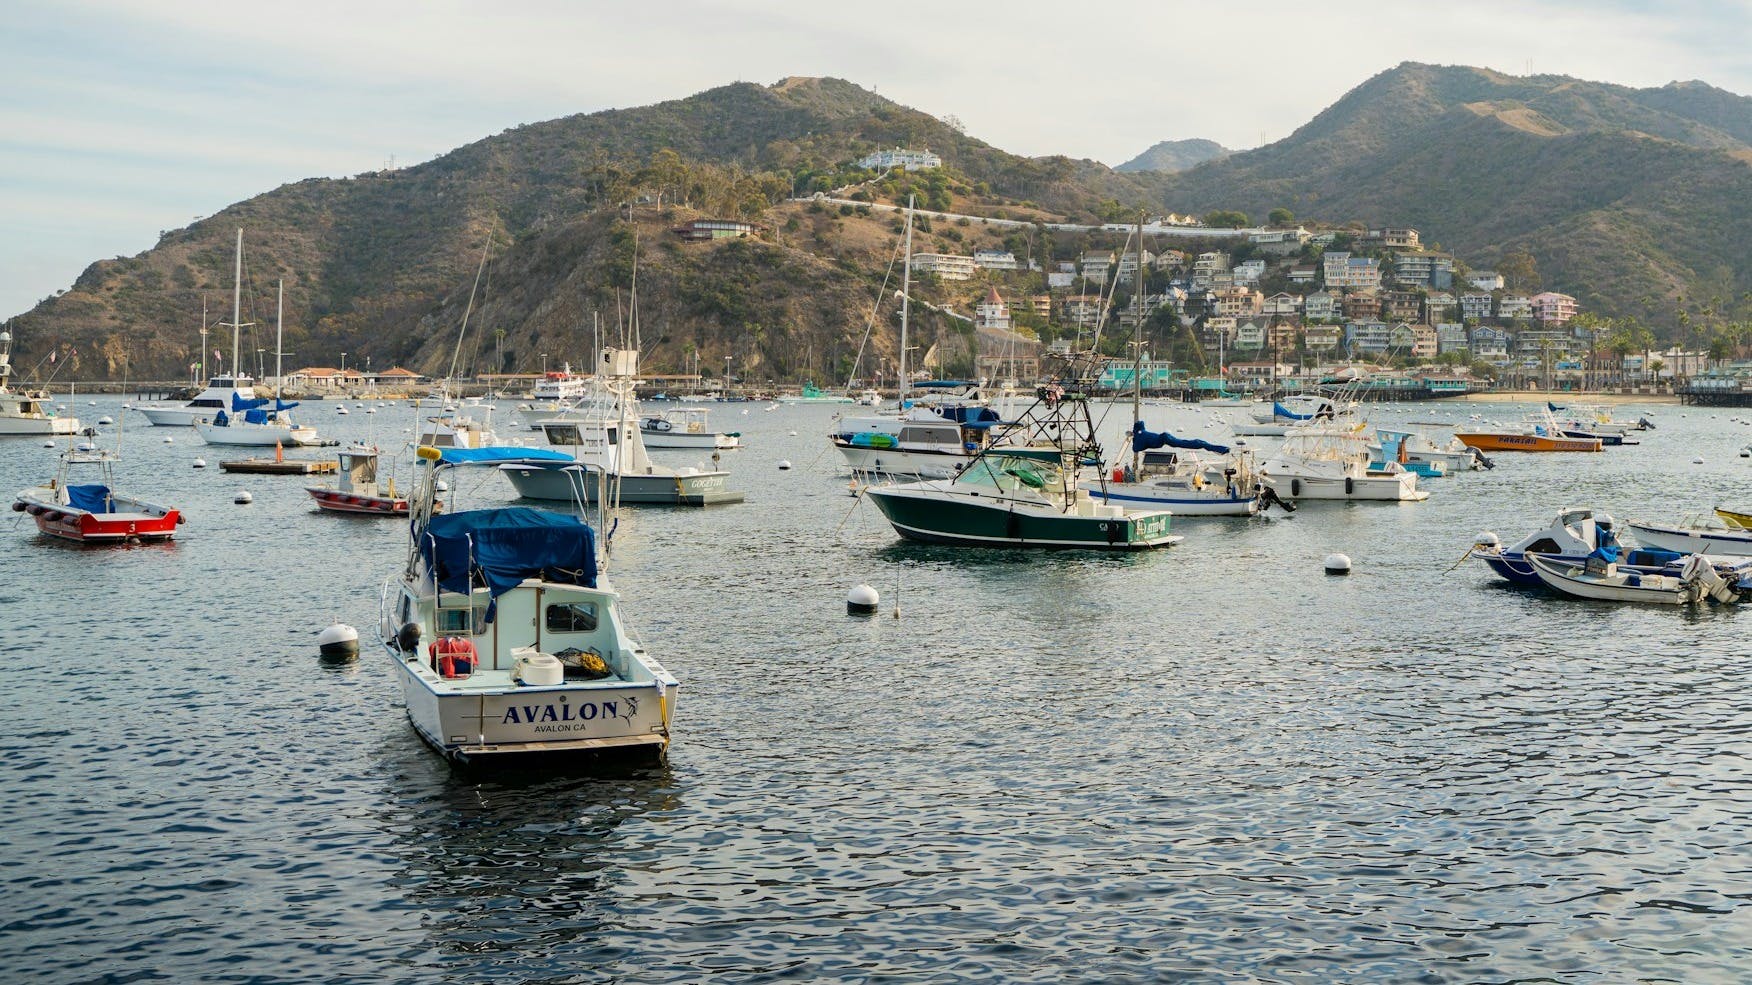 A view of many boats anchored in the ocean with hills in the background with buildings